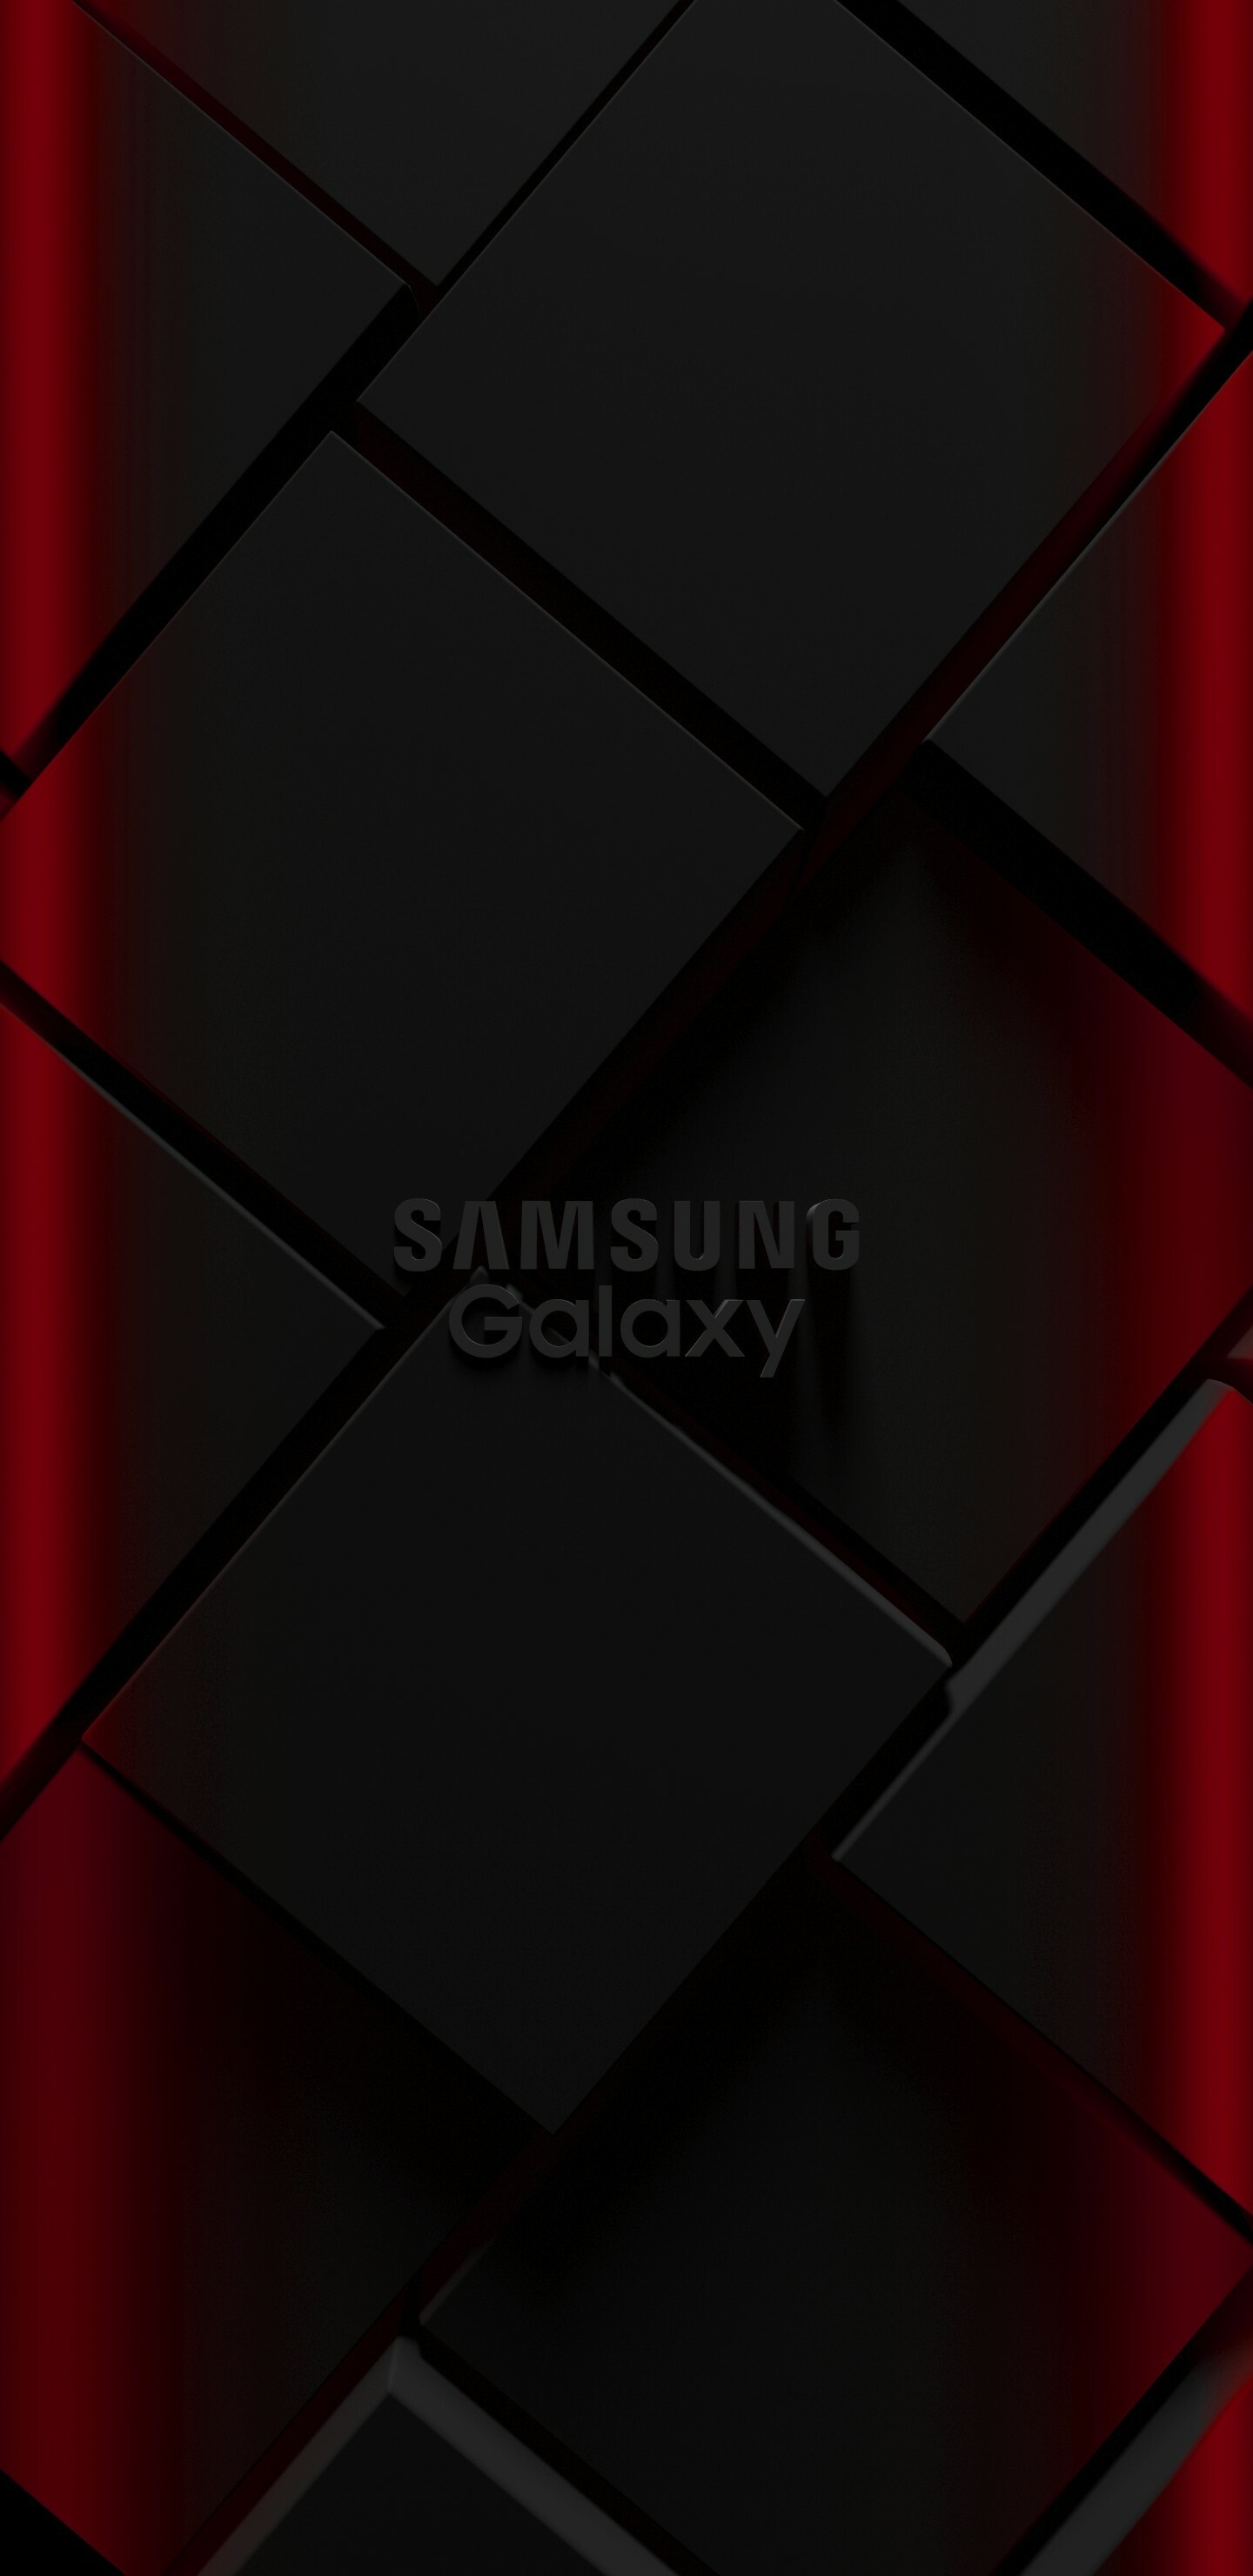 Samsung: The company's Galaxy S flagship smartphones, Innovative designs and easy-to-use functionality. 1440x2960 HD Wallpaper.